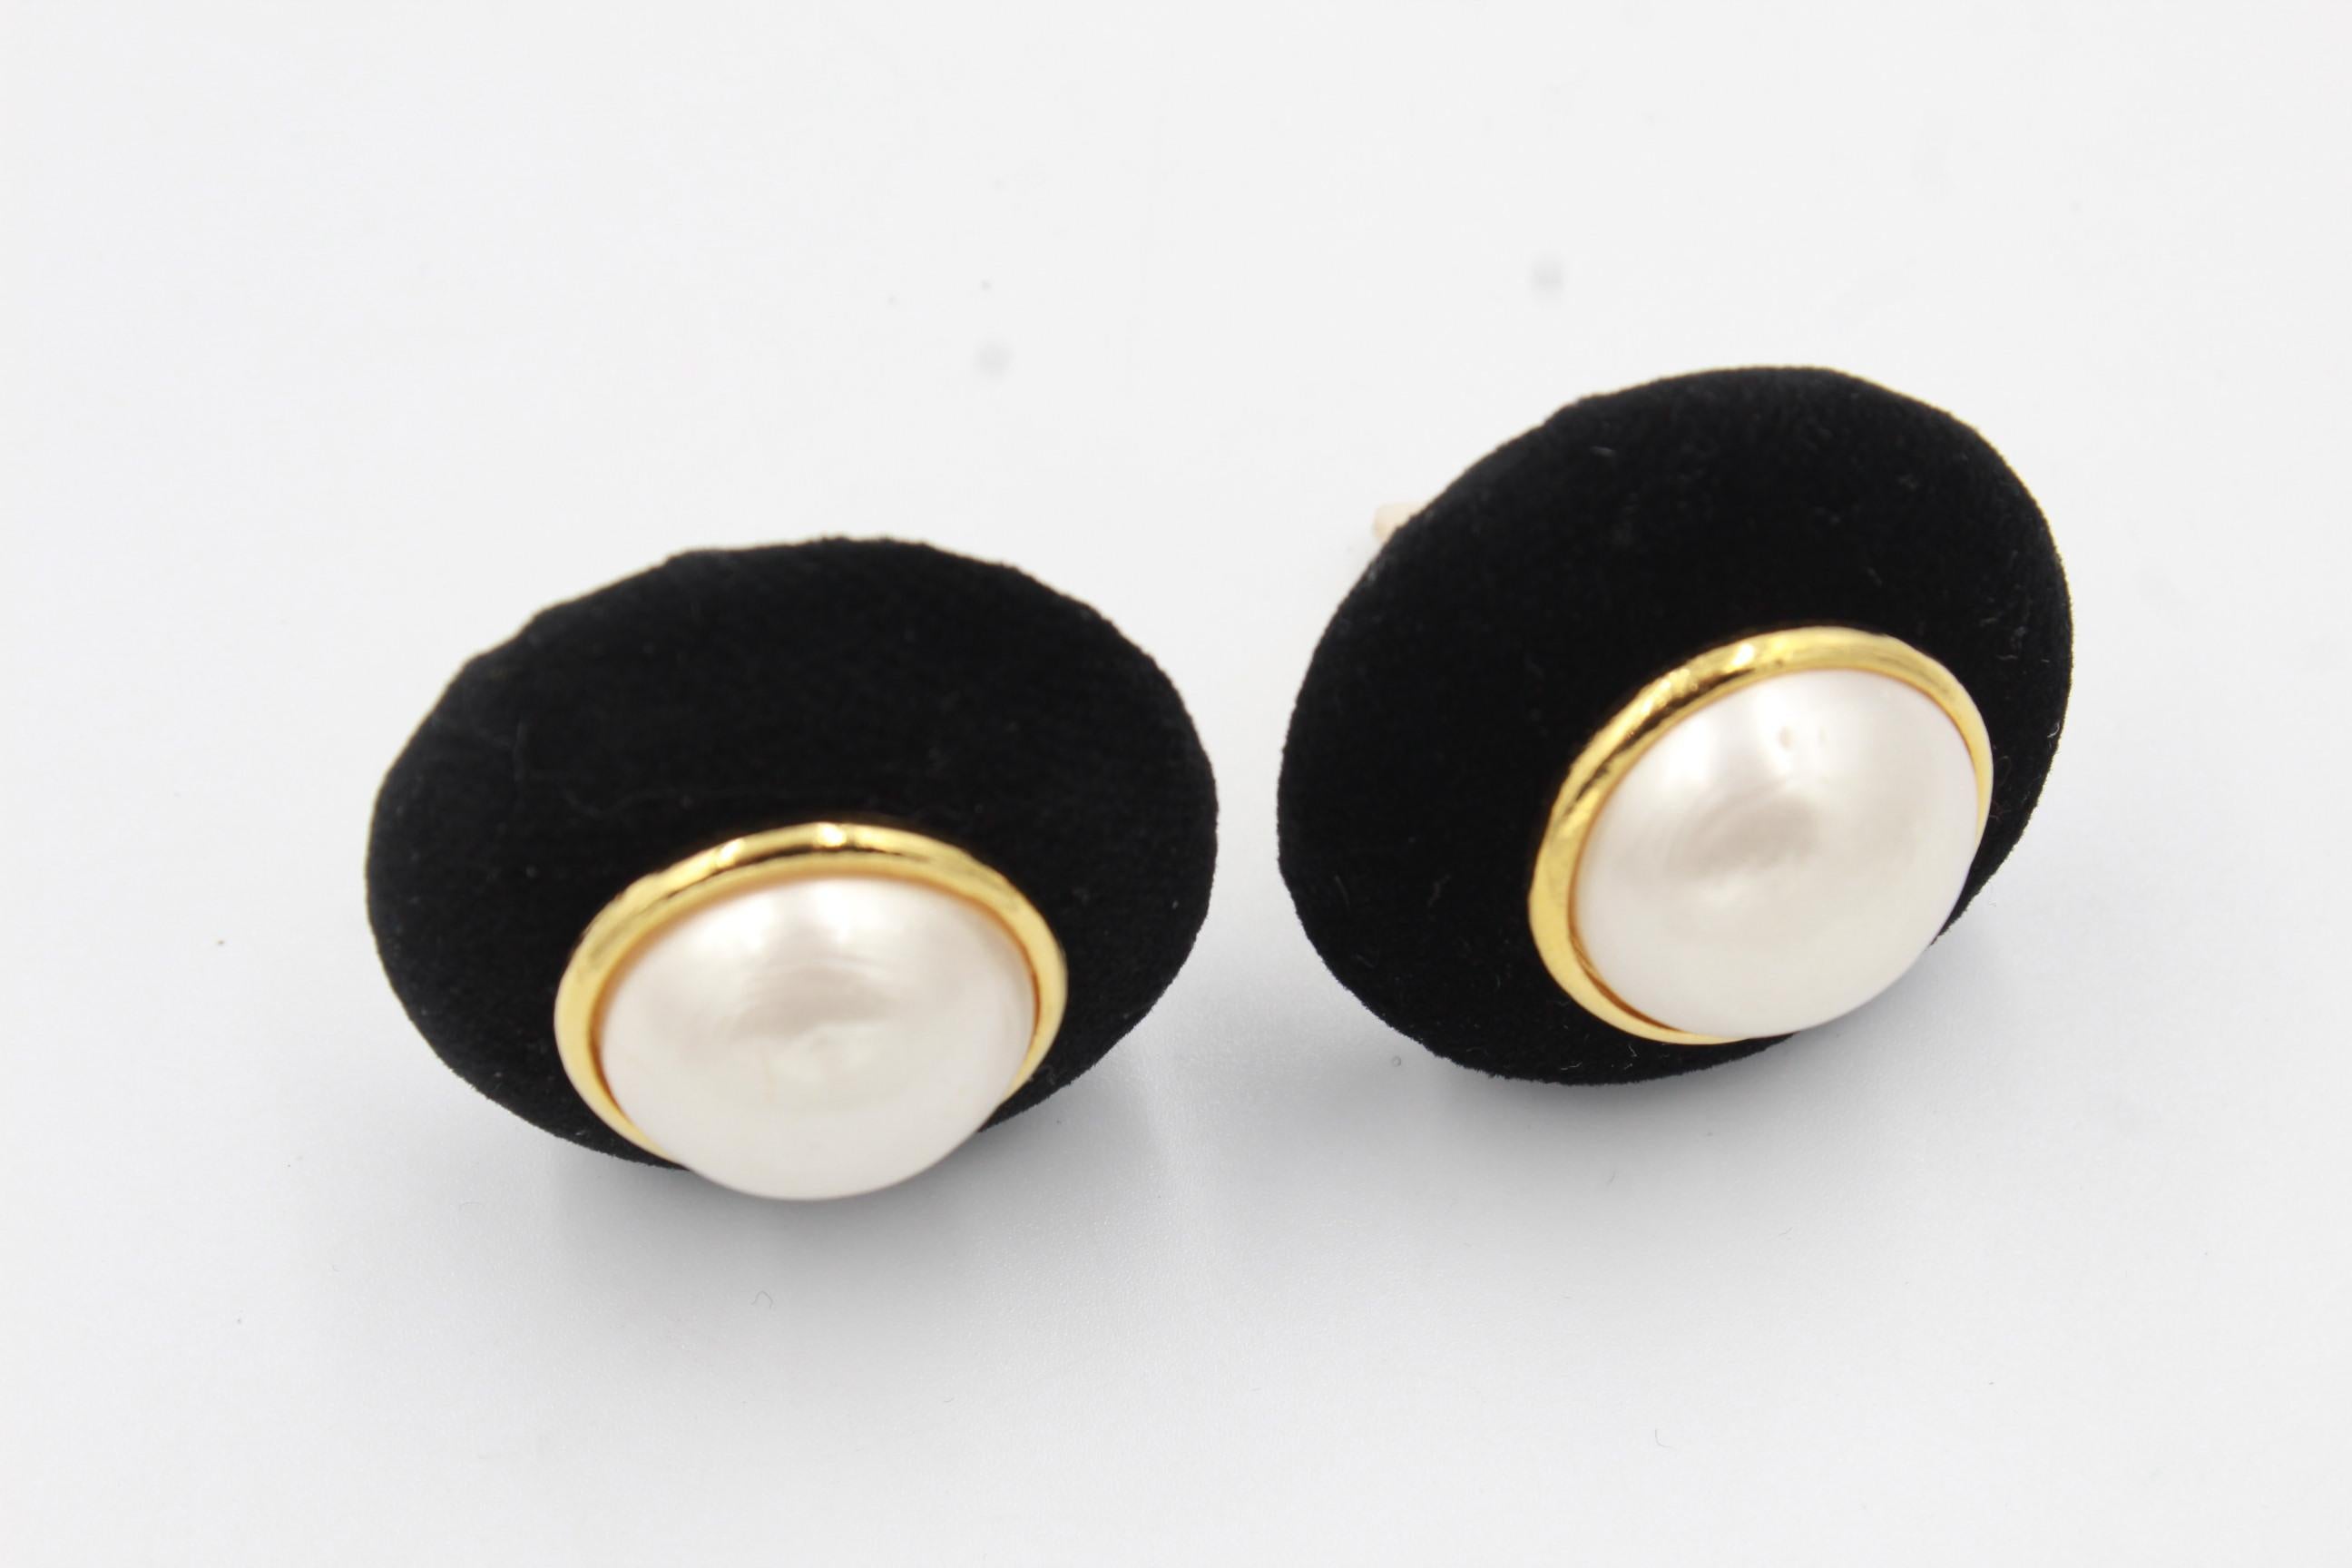 Vintage Chanel earring in black velvet and pearl, gold metal finishes. 
By Victoire de Castellane.
Good condition.
Clip-on earring.
4cm
